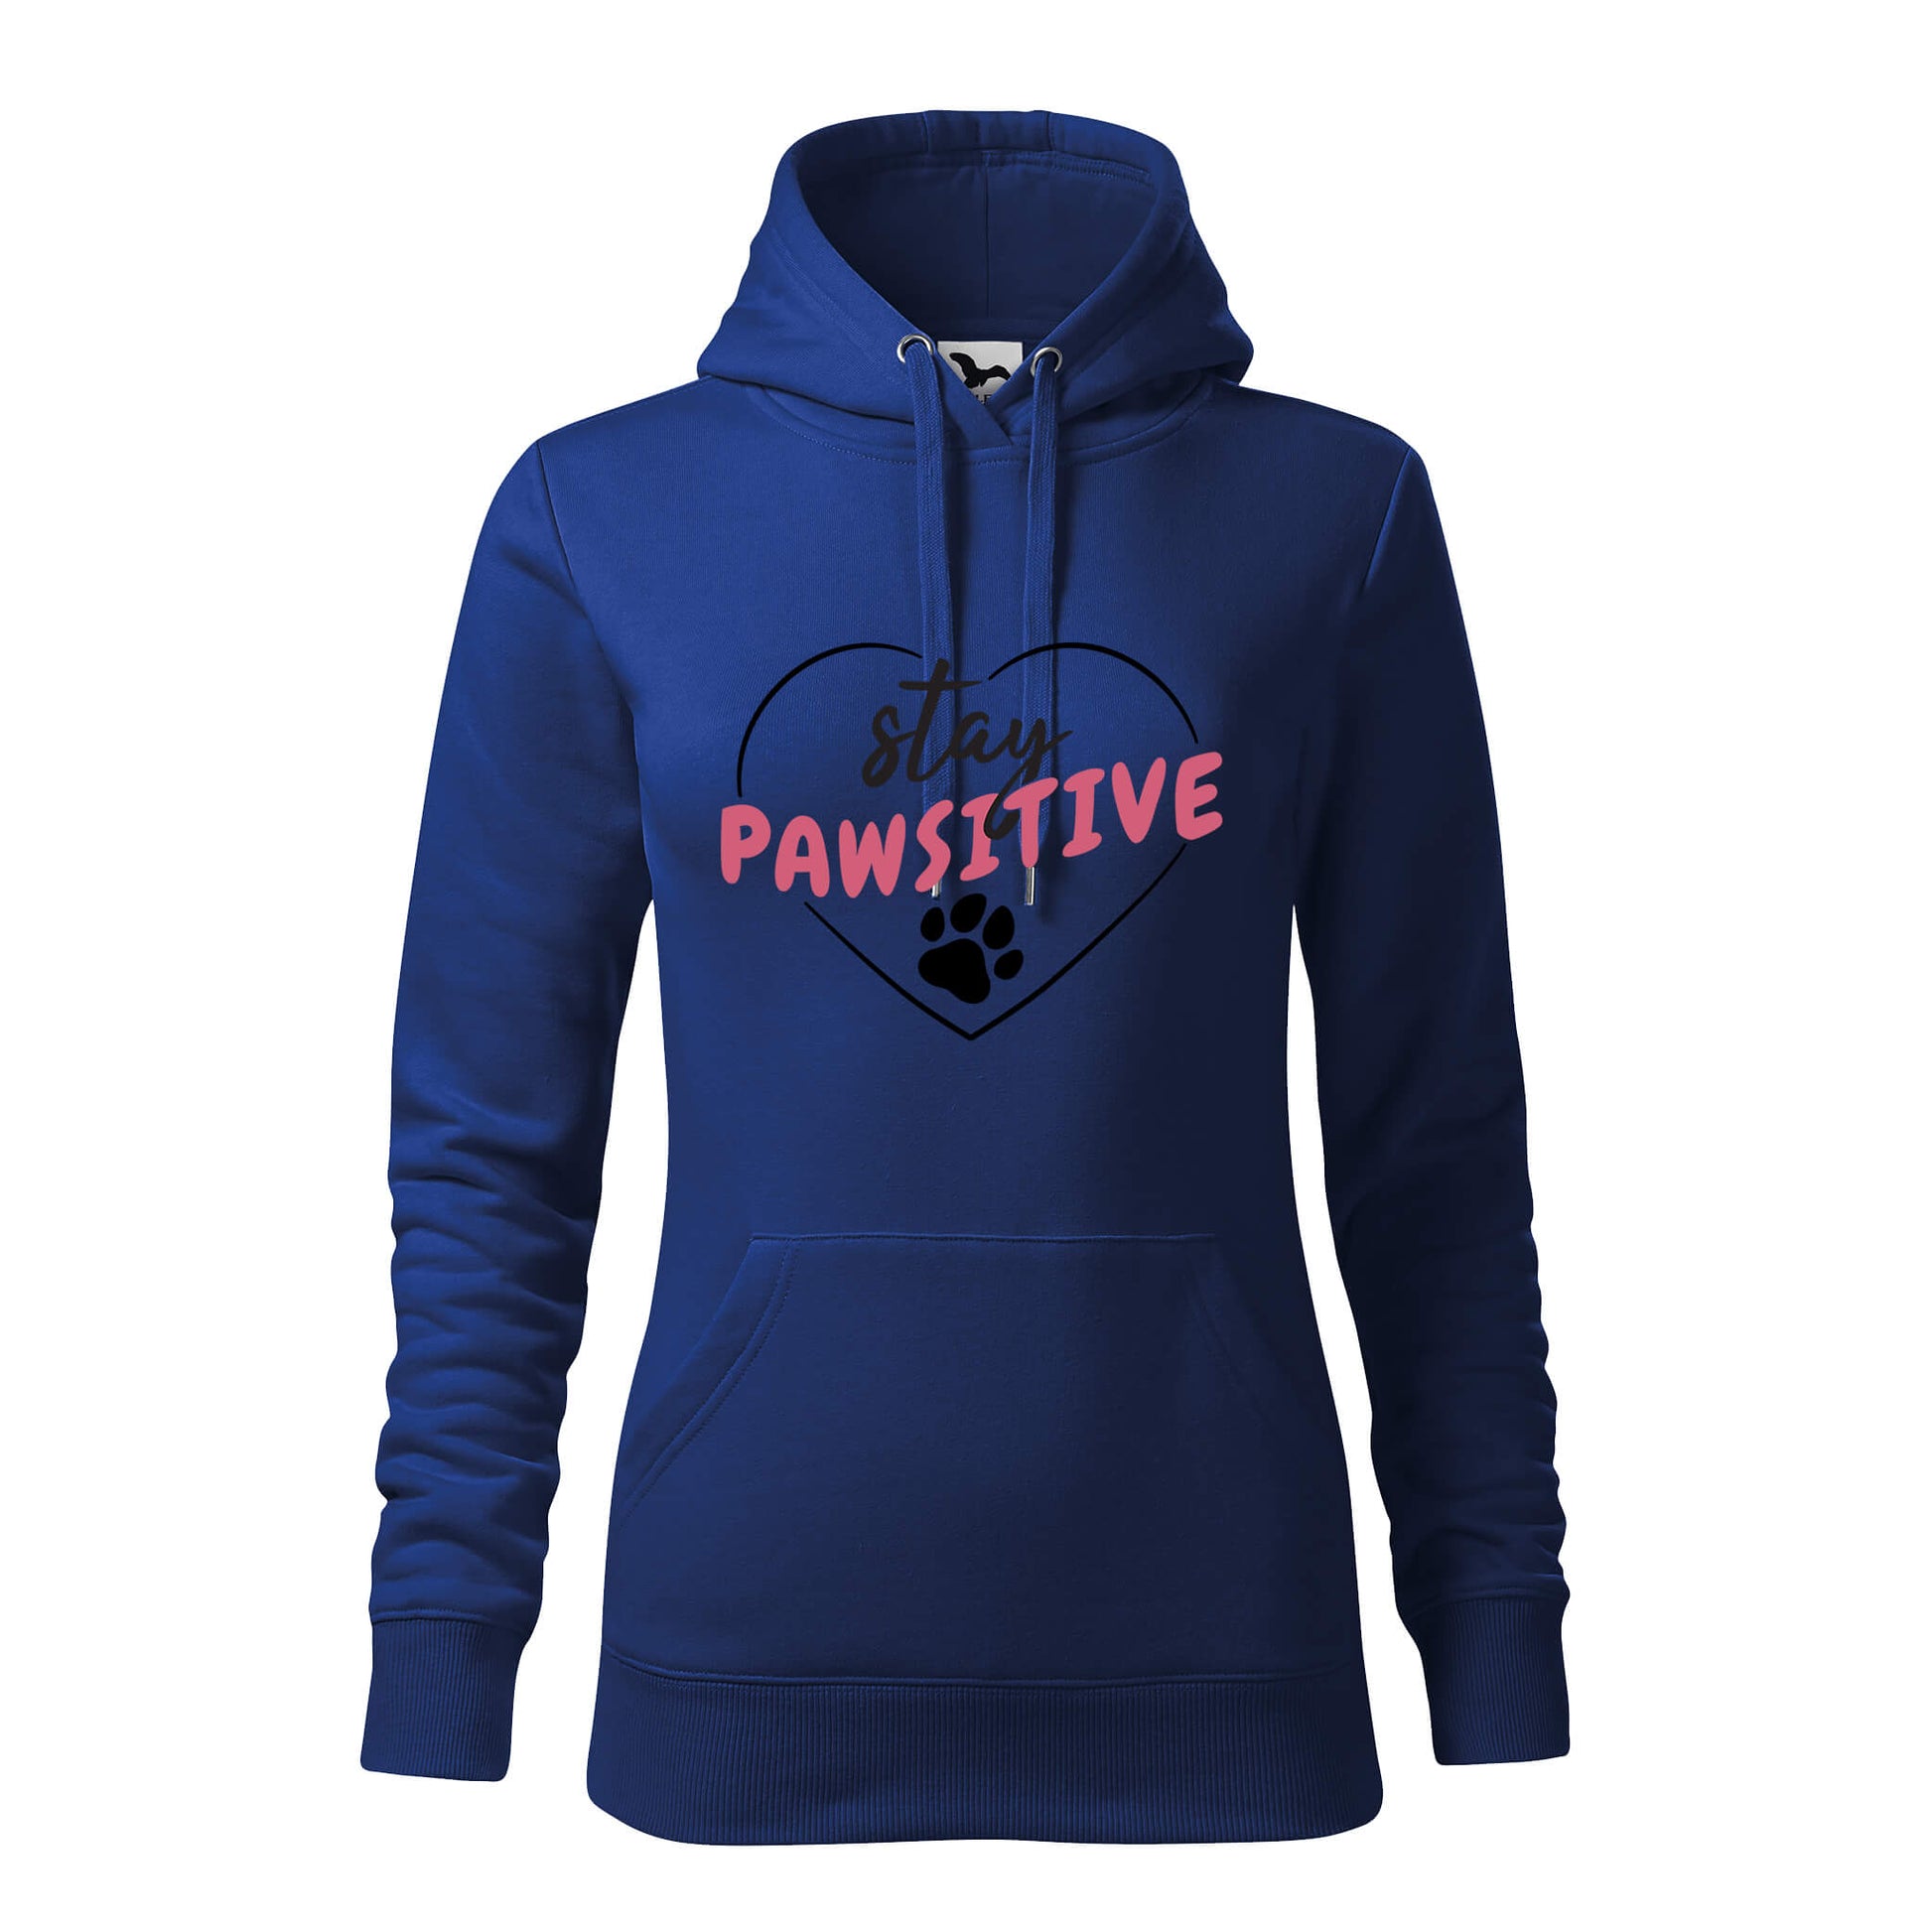 Stay pawsitive hoodie - rvdesignprint